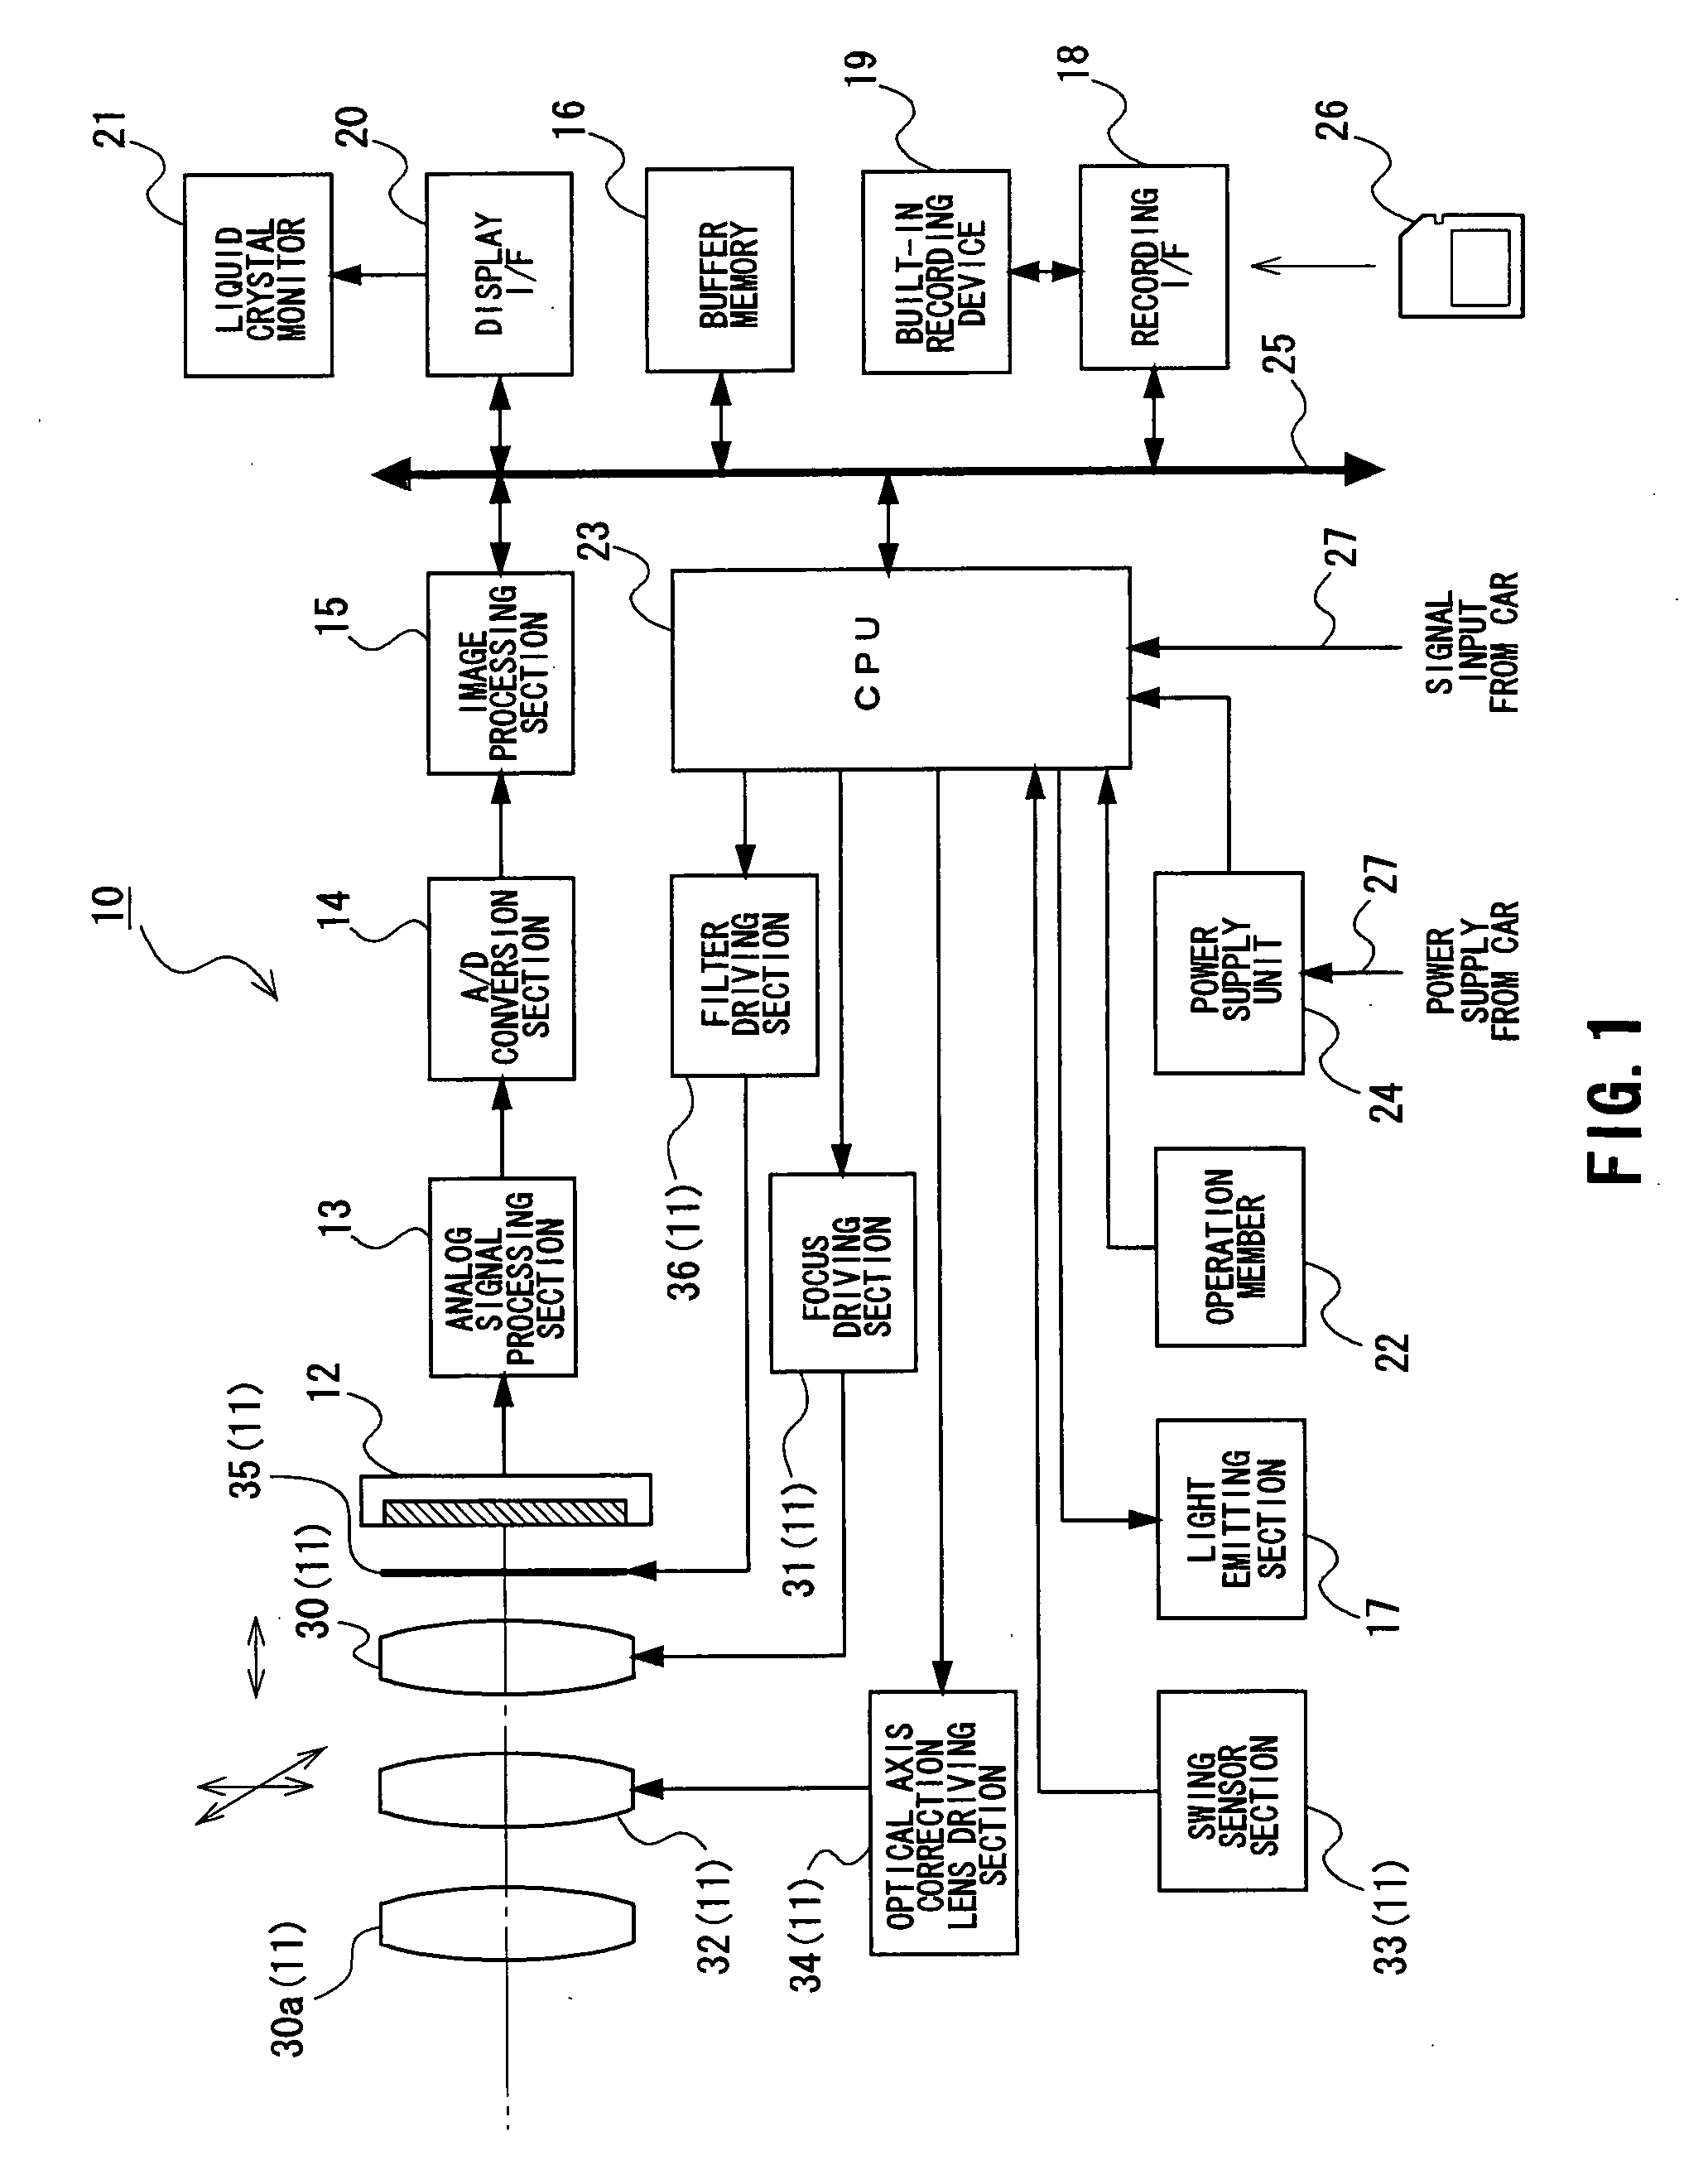 Imaging apparatus and drive recorder system